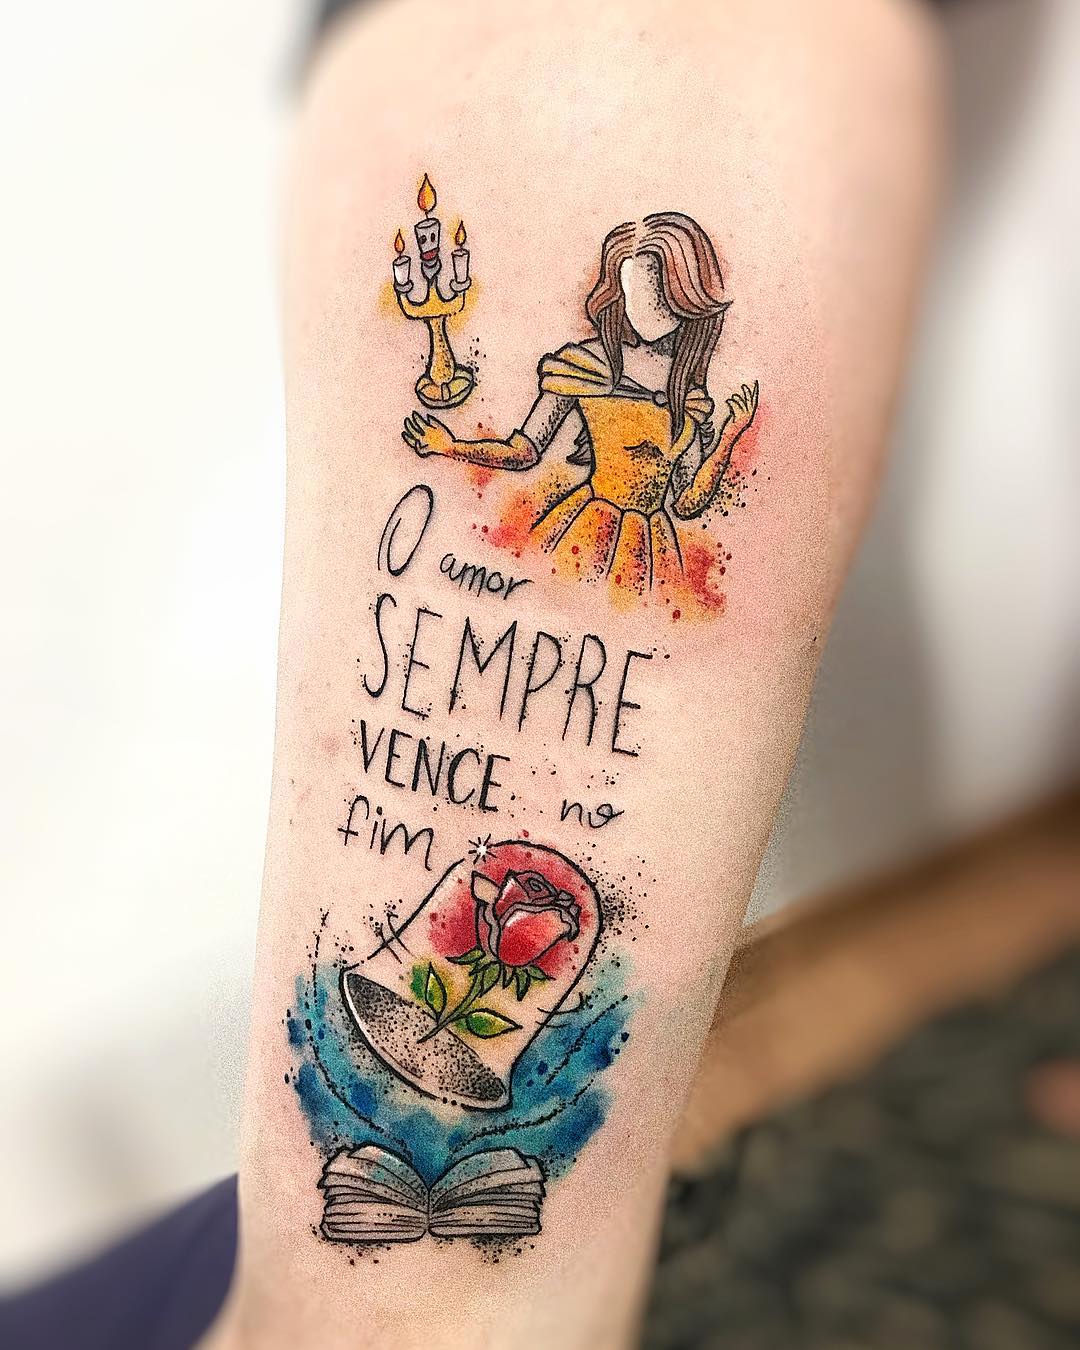 the beauty and the beast tattoo colour by @leods21